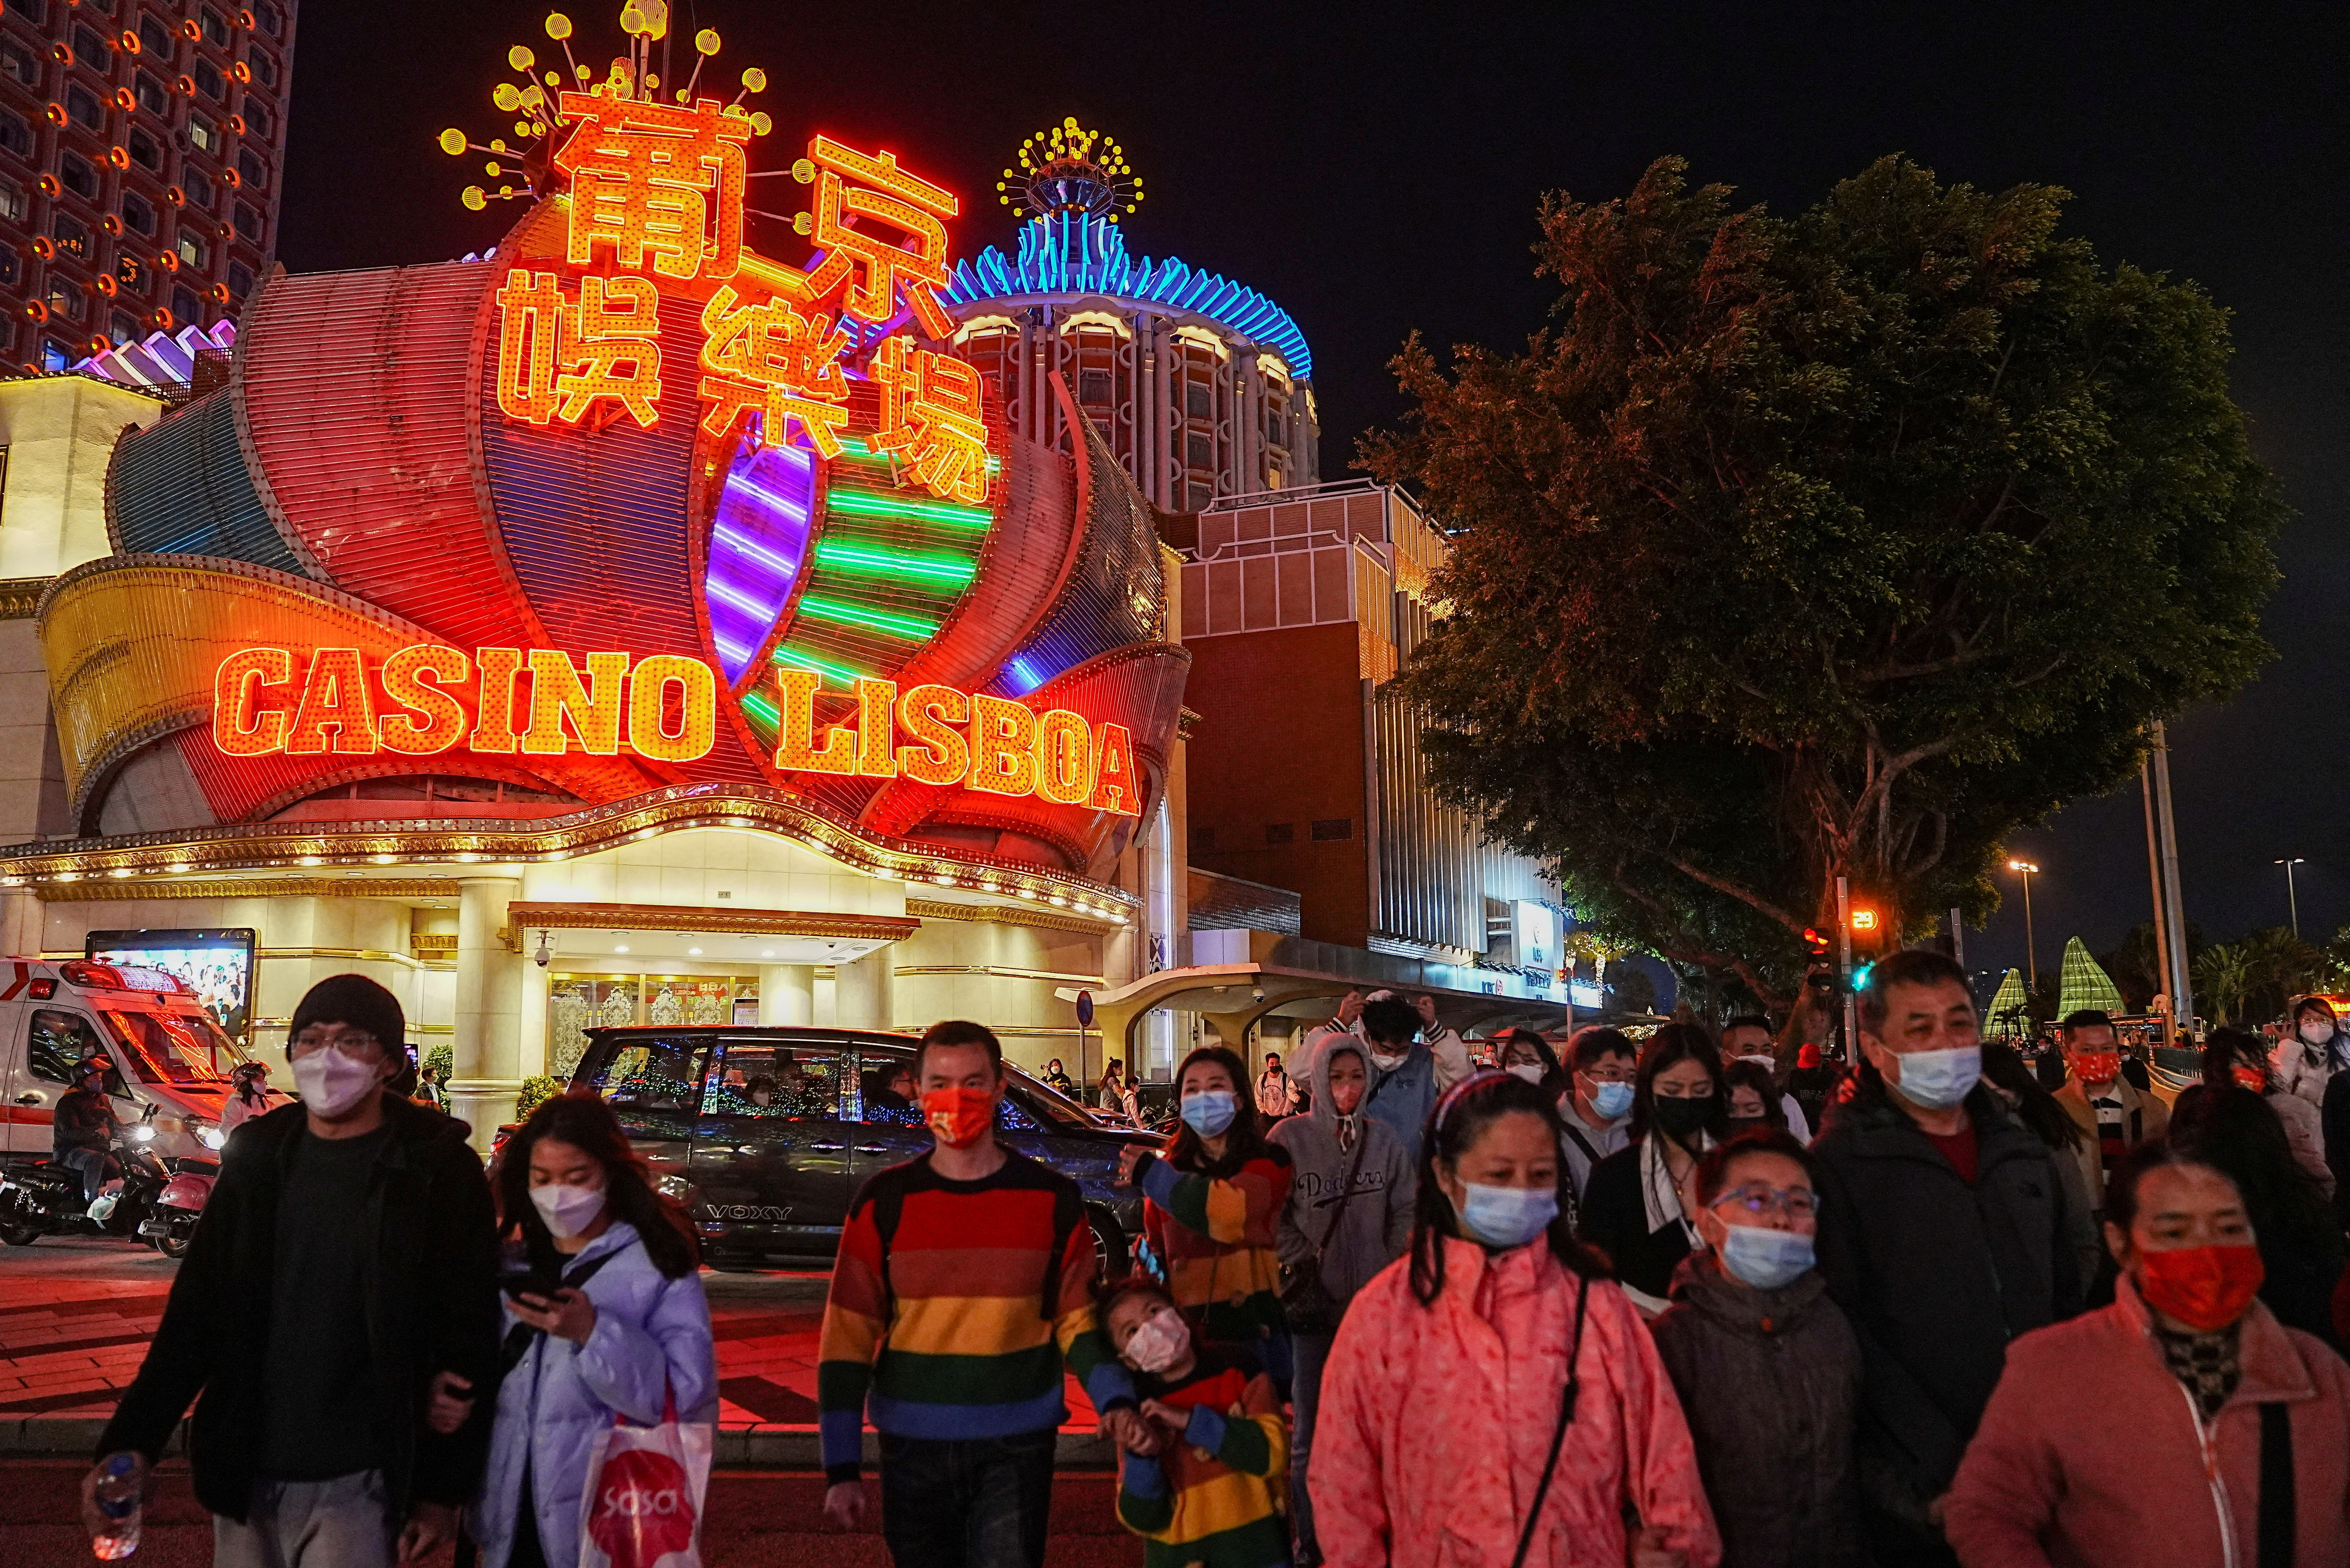 Visitors walk past the Casino Lisboa operated by SJM Holdings during Lunar New Year in Macau